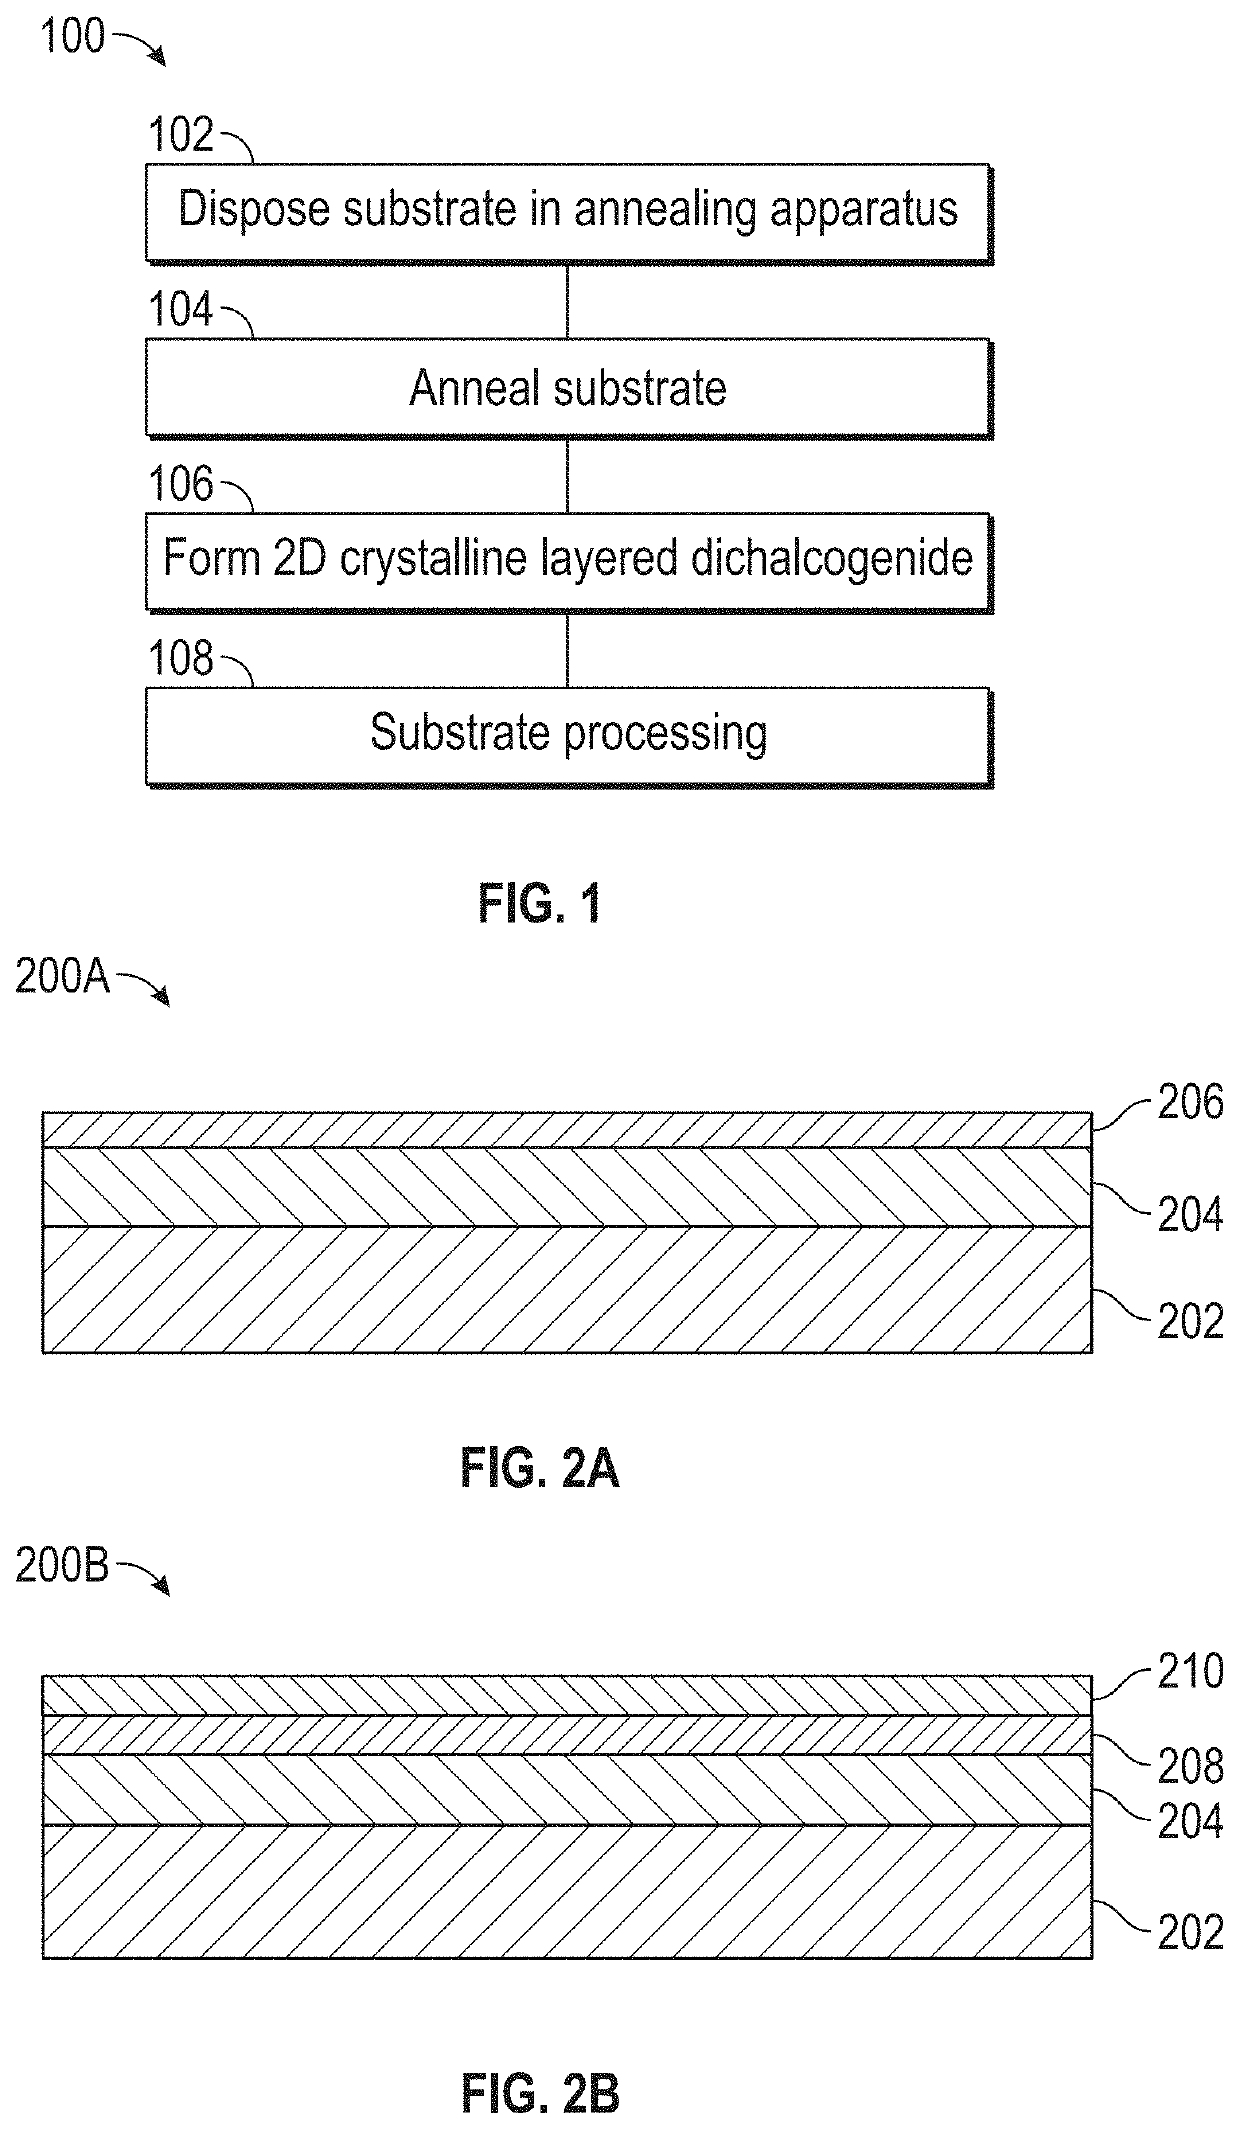 Formation of crystalline, layered transition metal dichalcogenides